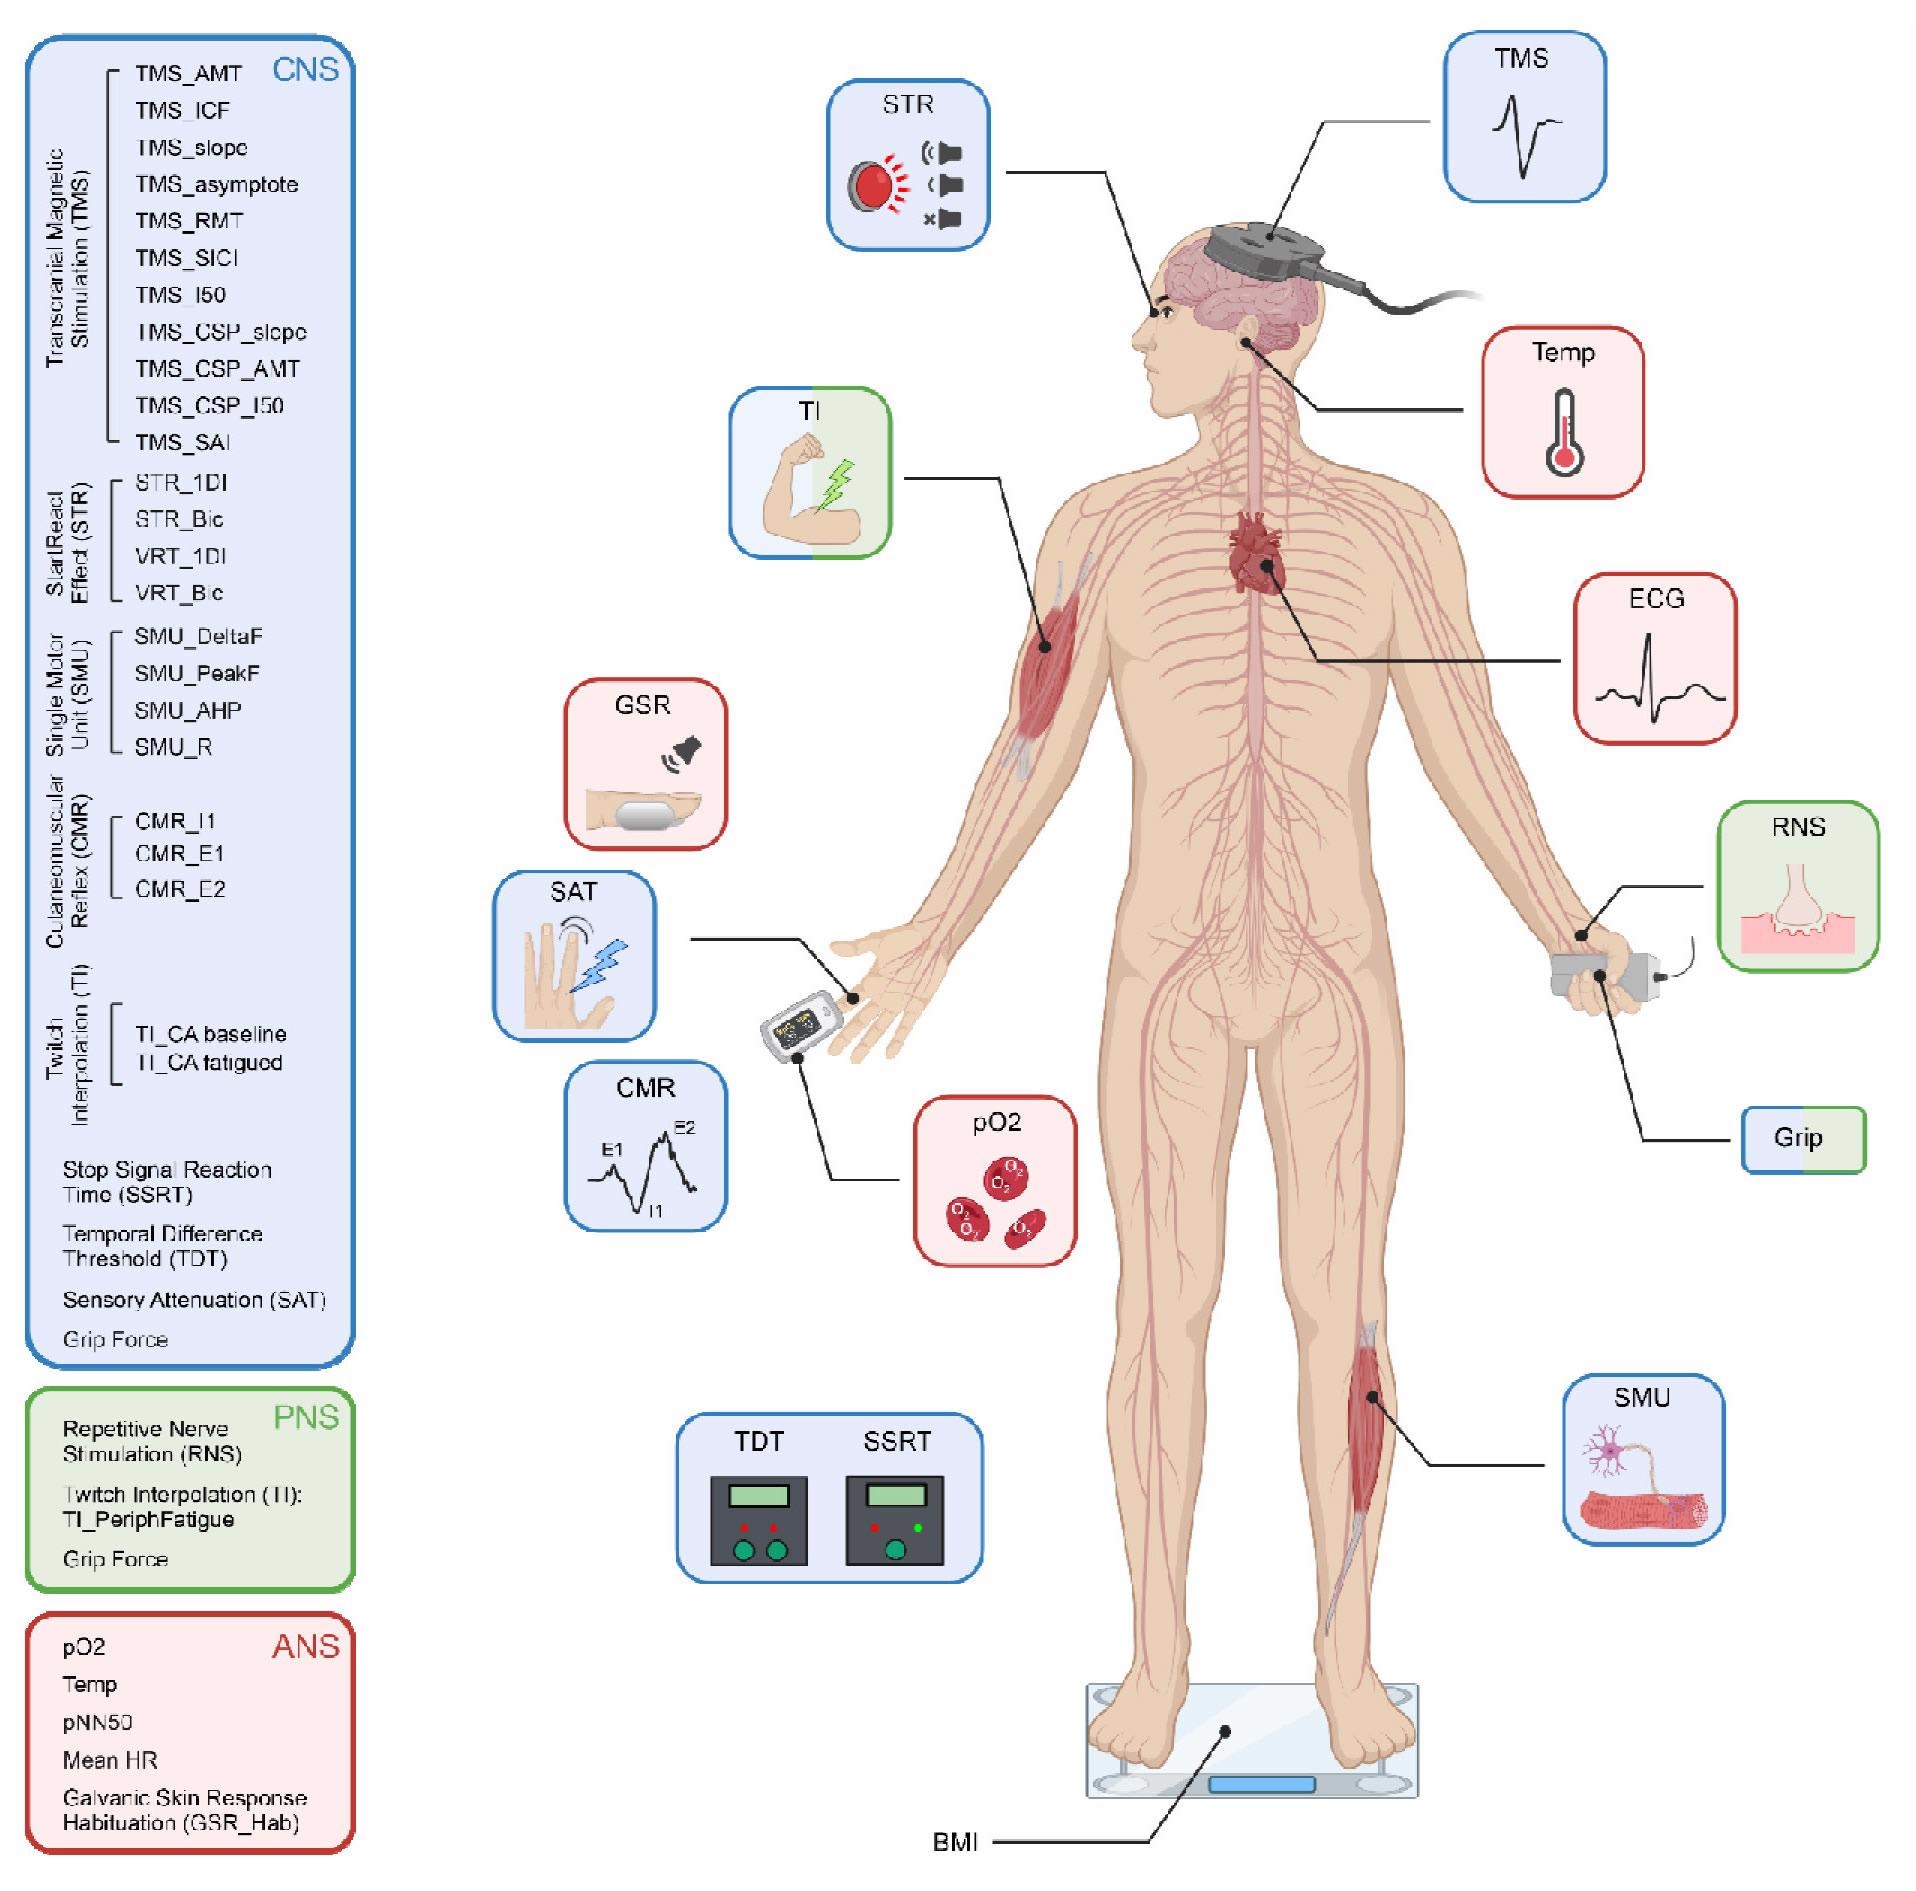 Schematic representation of the different tests performed, colour coded according to which components of the central, peripheral and autonomic nervous systems (CNS, PNS, ANS) they assessed. TMS, transcranial magnetic stimulation; ECG, electrocardiogram; RNS, repetitive nerve stimulation; SMU, single motor unit recording; BMI, body mass index; TDT, temporal difference threshold; SSRT, stop signal reaction time; pO2, blood oxygen saturation; CMR, cutaneomuscular reflex; SAT, sensory attenuation with movement; GSR, habituation of the galvanic skin response to loud sound; TI, twitch interpolation, STR, StartReact effect.